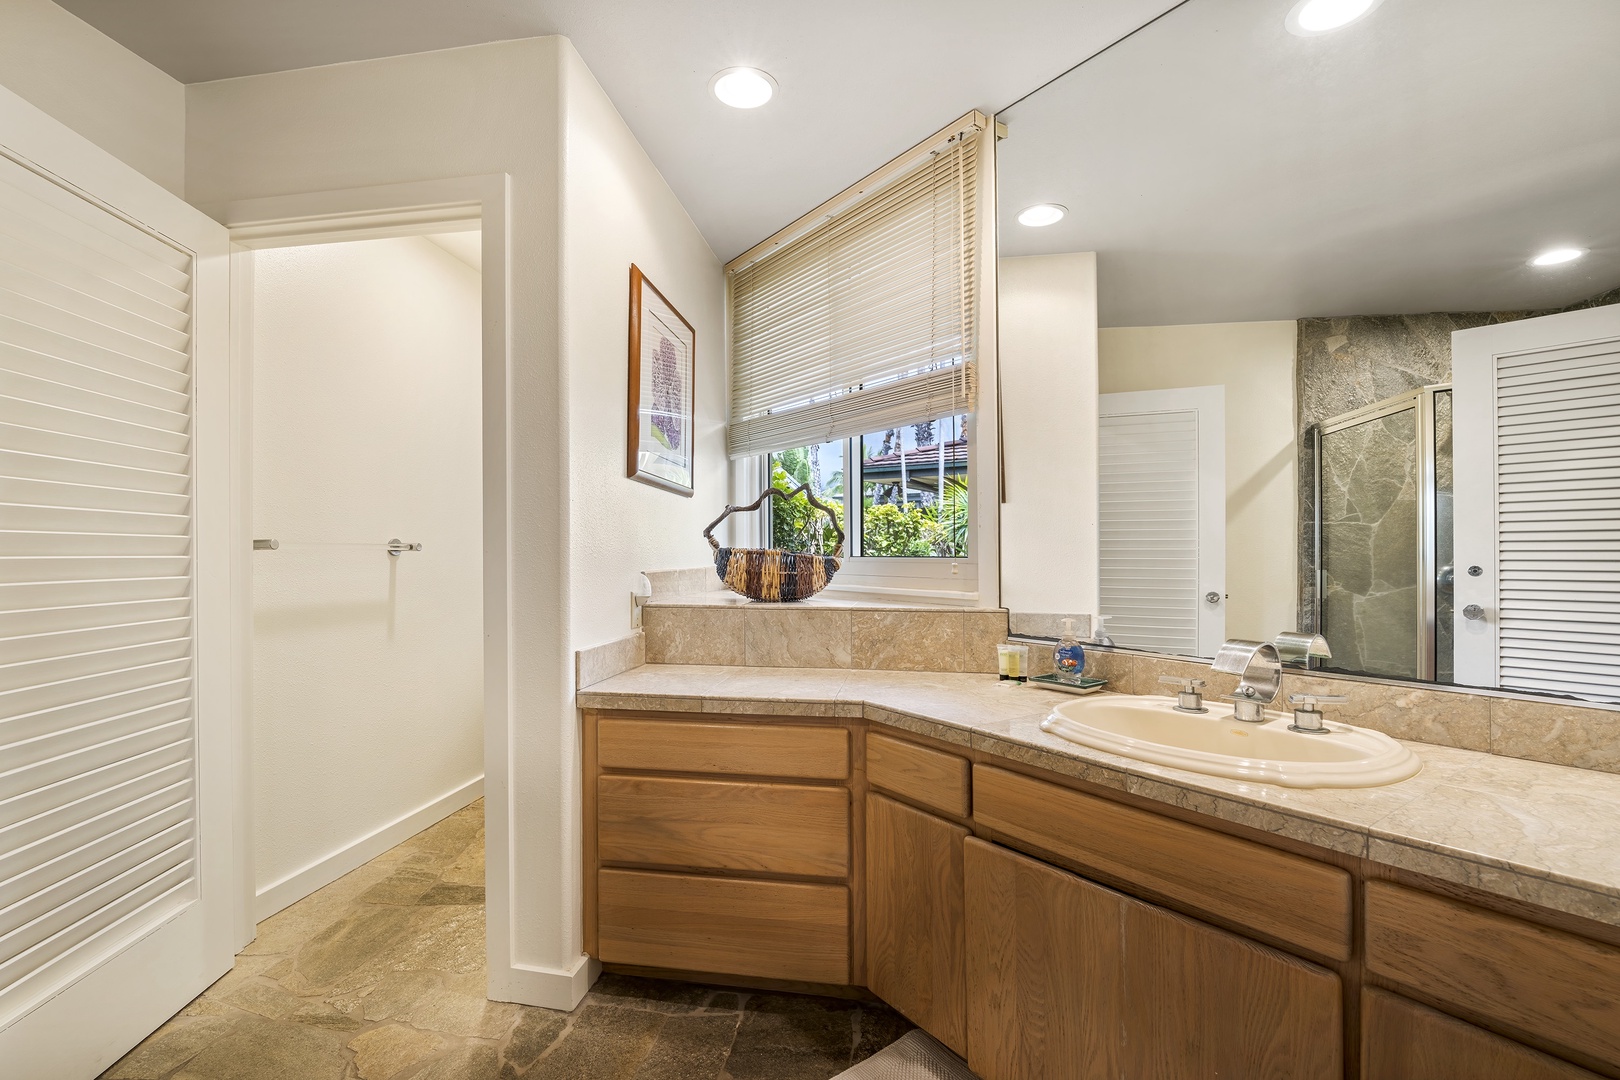 Kailua Kona Vacation Rentals, Ali'i Point #12 - Guest bathroom down the hall from the bedroom